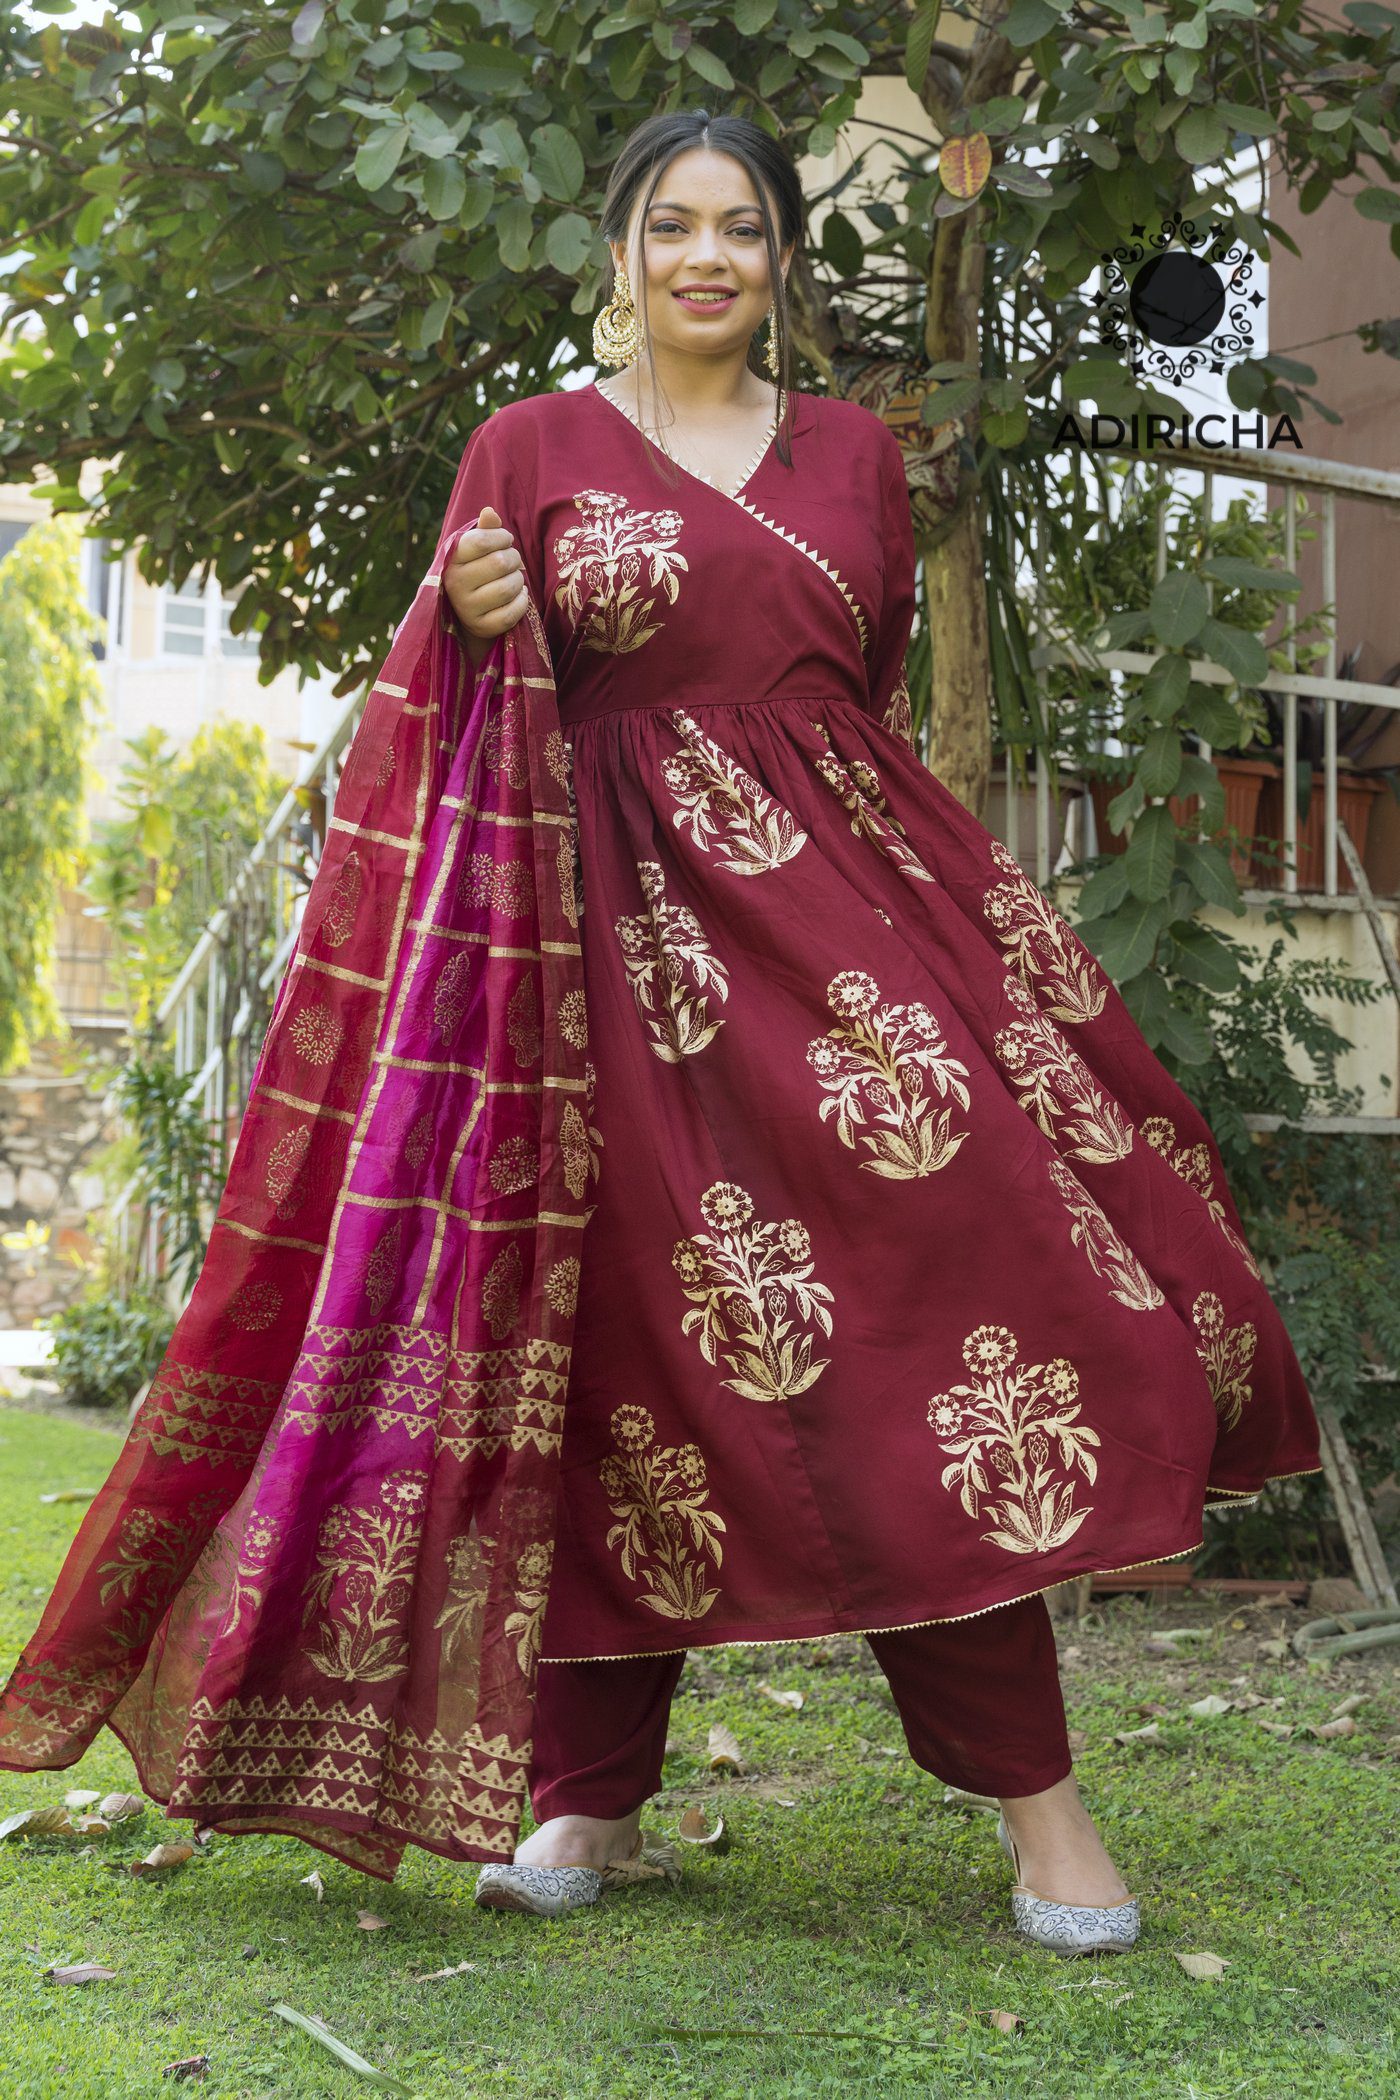 NEW ARRIVAL MAROON ANARKALI SUIT @ 31% OFF Rs 2100.00 Only FREE Shipping +  Extra Discount - SILKY NET SUIT, Buy SILKY NET SUIT Online, Anarkali Salwar  Suit, Semi Stiched Suit, Buy